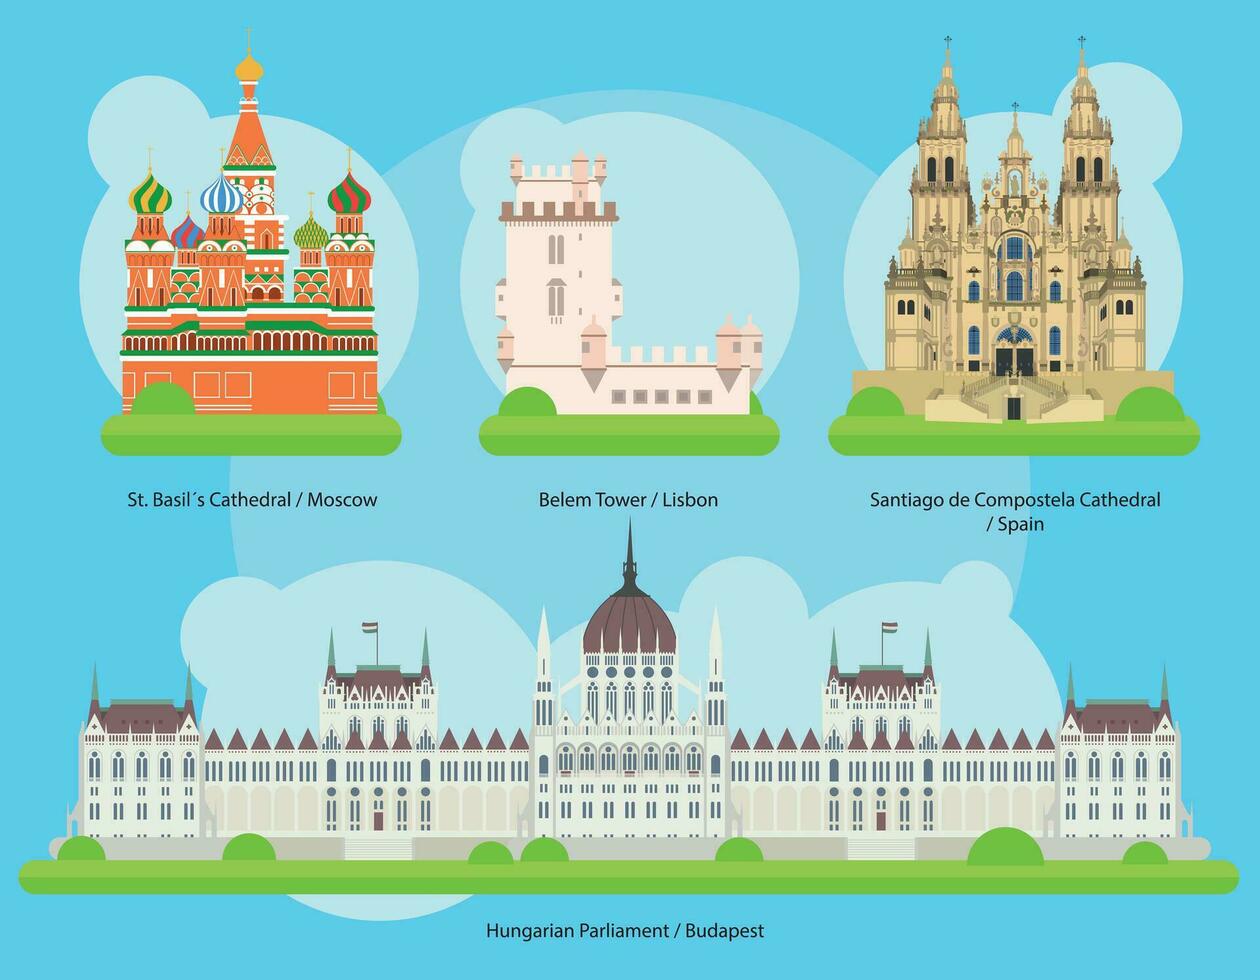 Vector illustration of Monuments and landmarks in Europe Set 2. St Basils Cathedral - Moscow, Belem Tower - Lisbon, Santiago de Compostela Cathedral - Spain, and Hungarian Parliament - Budapest.